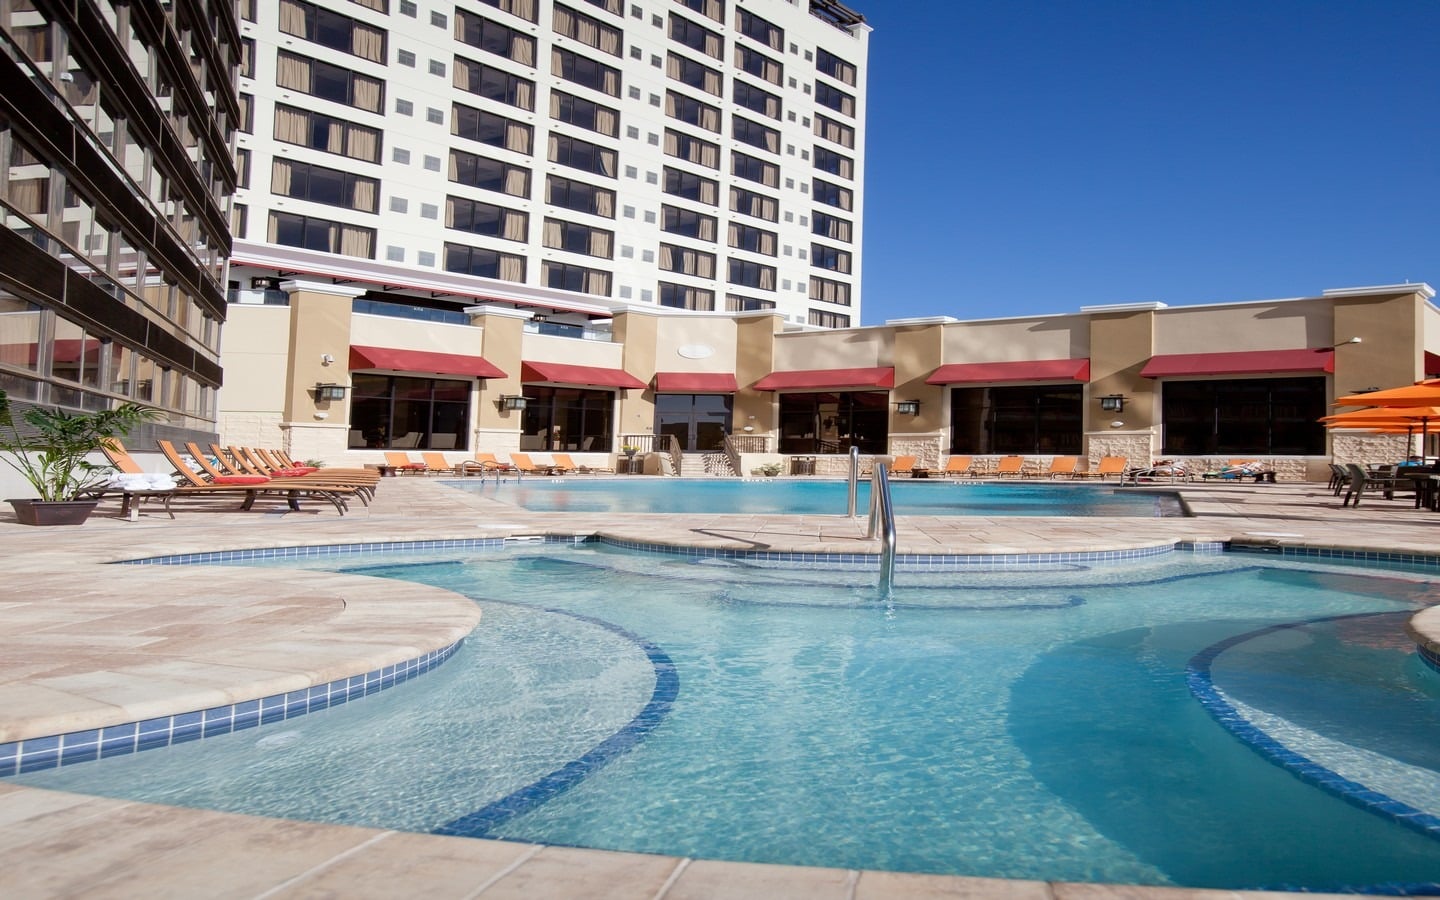 stay cool in the pool at the ramada plaza resort orlando